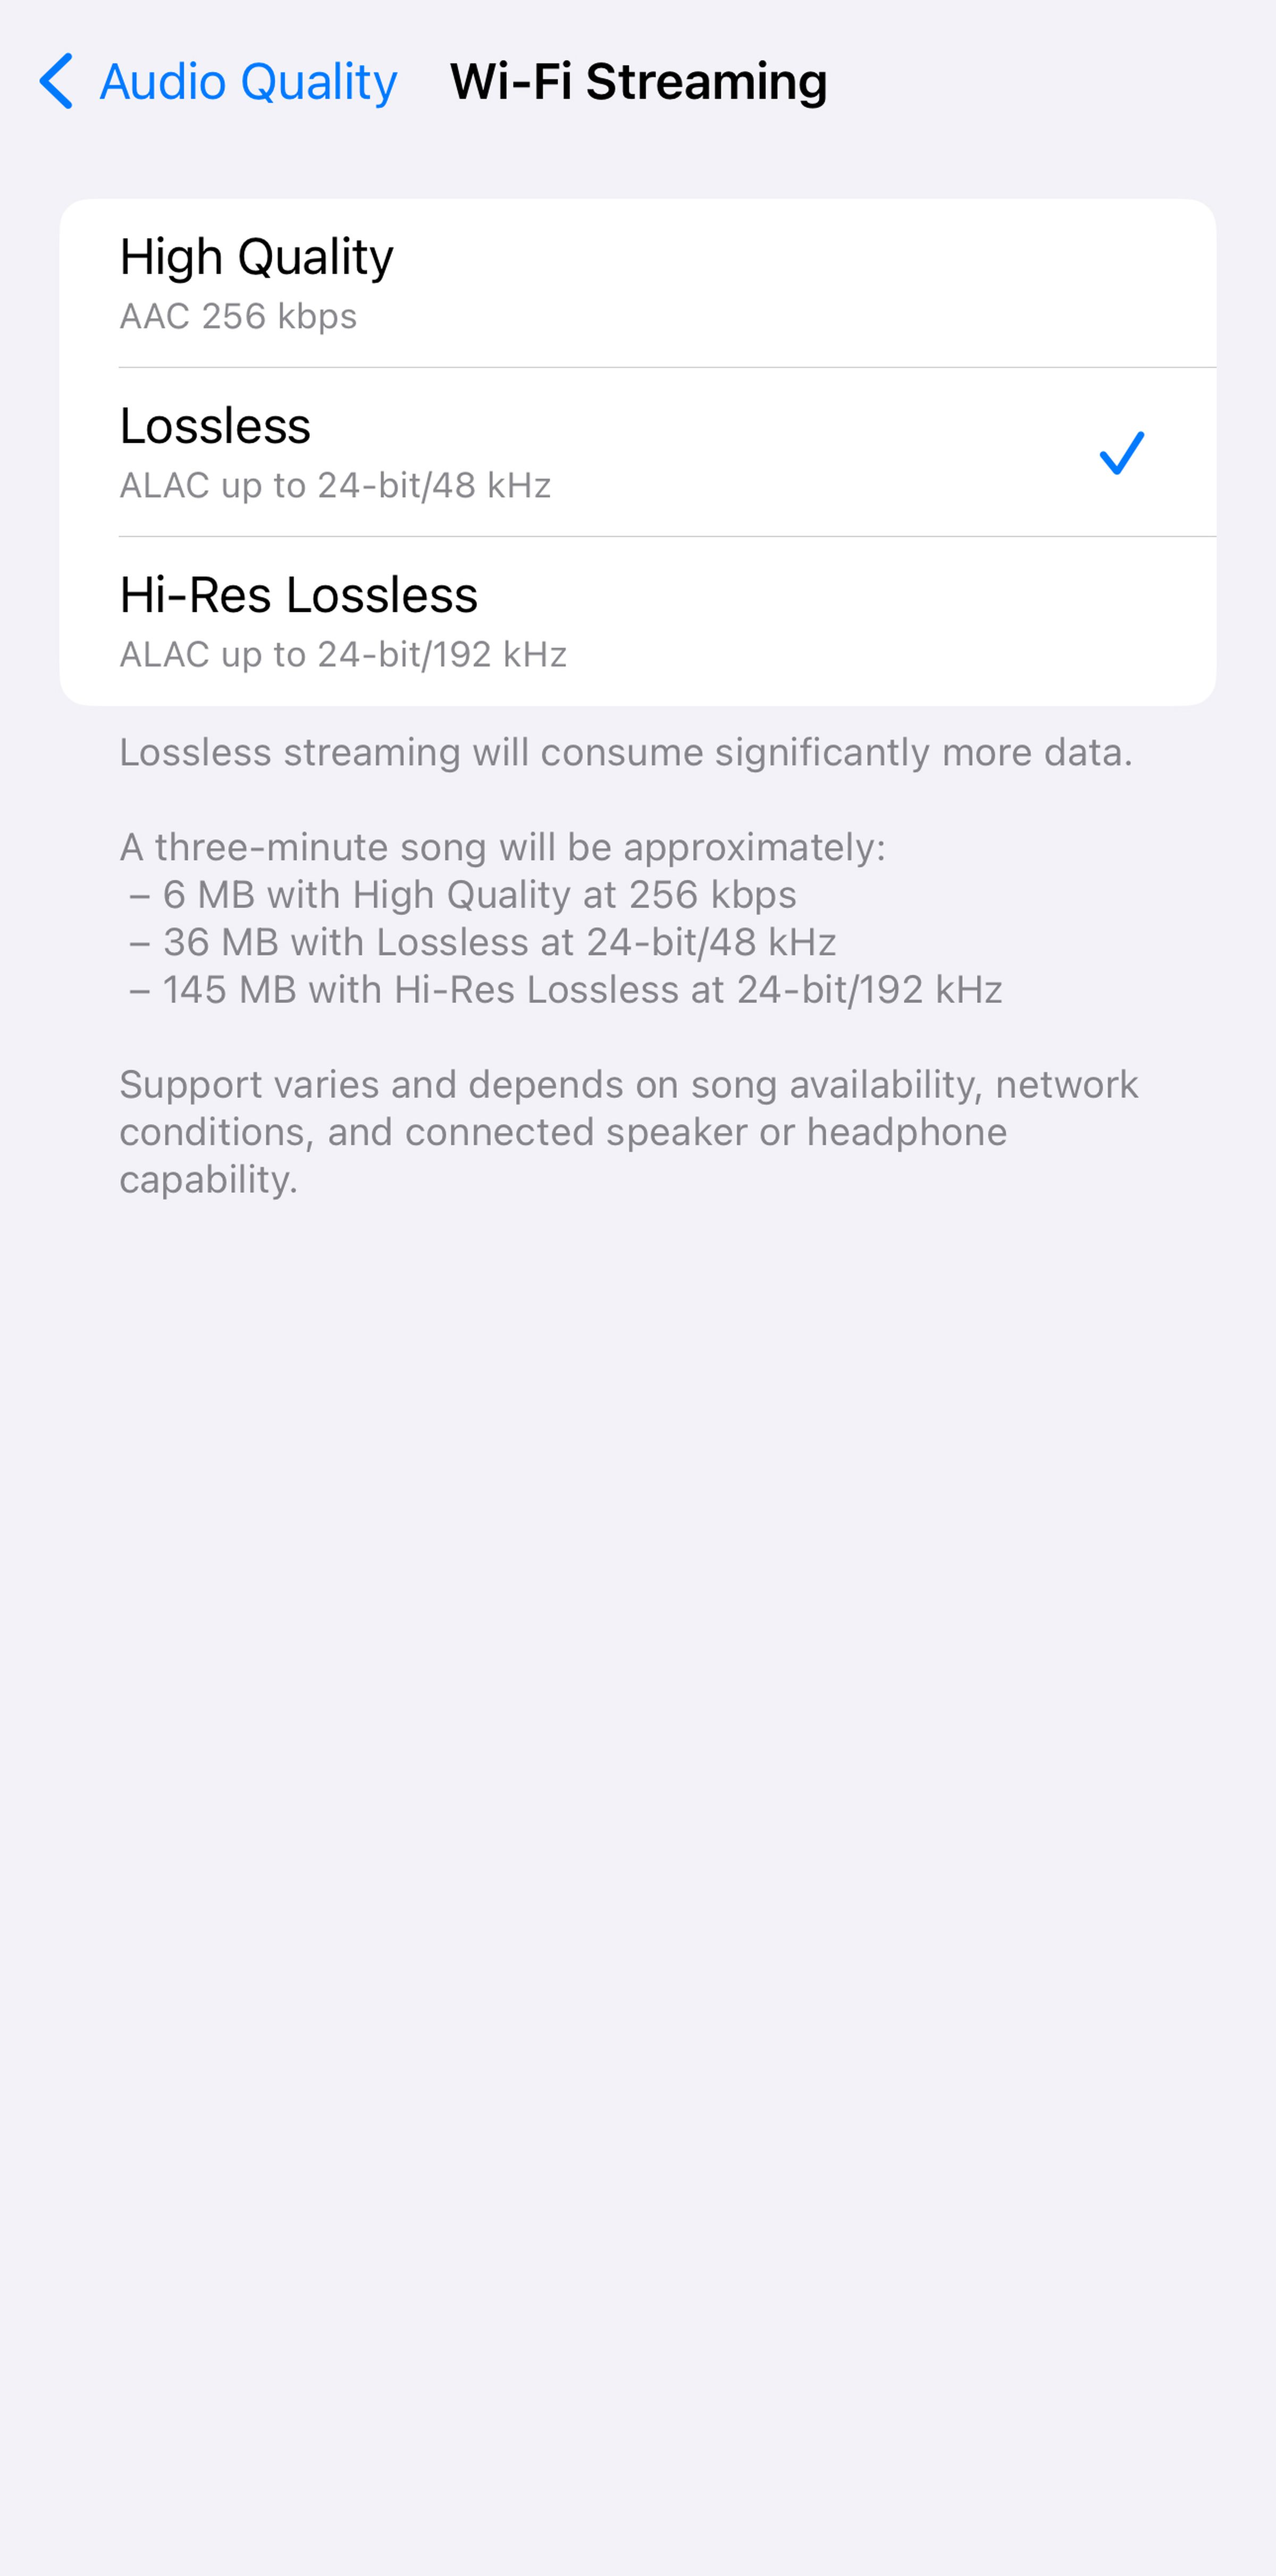 Wi-Fi streaming page on iOS screen showing High Quality, Lossless, and Hi-Res Lossless.